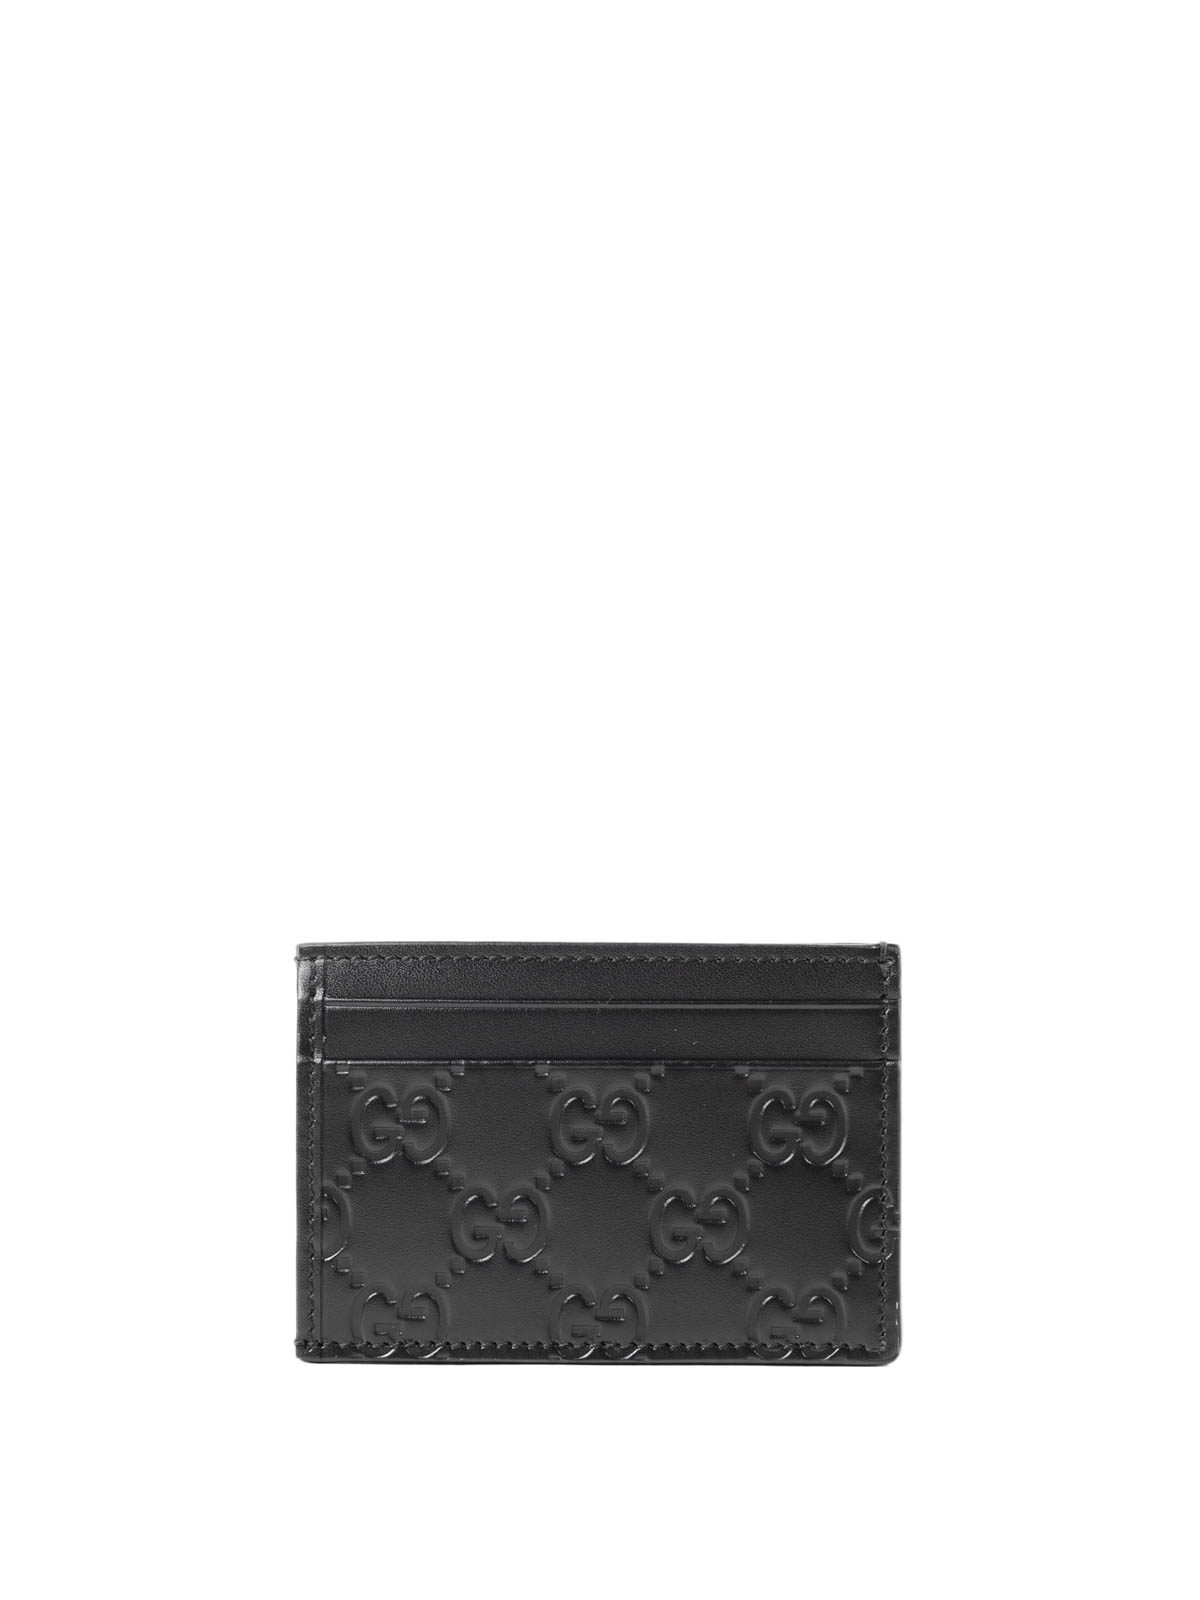 Gucci GG Embossed Leather Wallet for Men